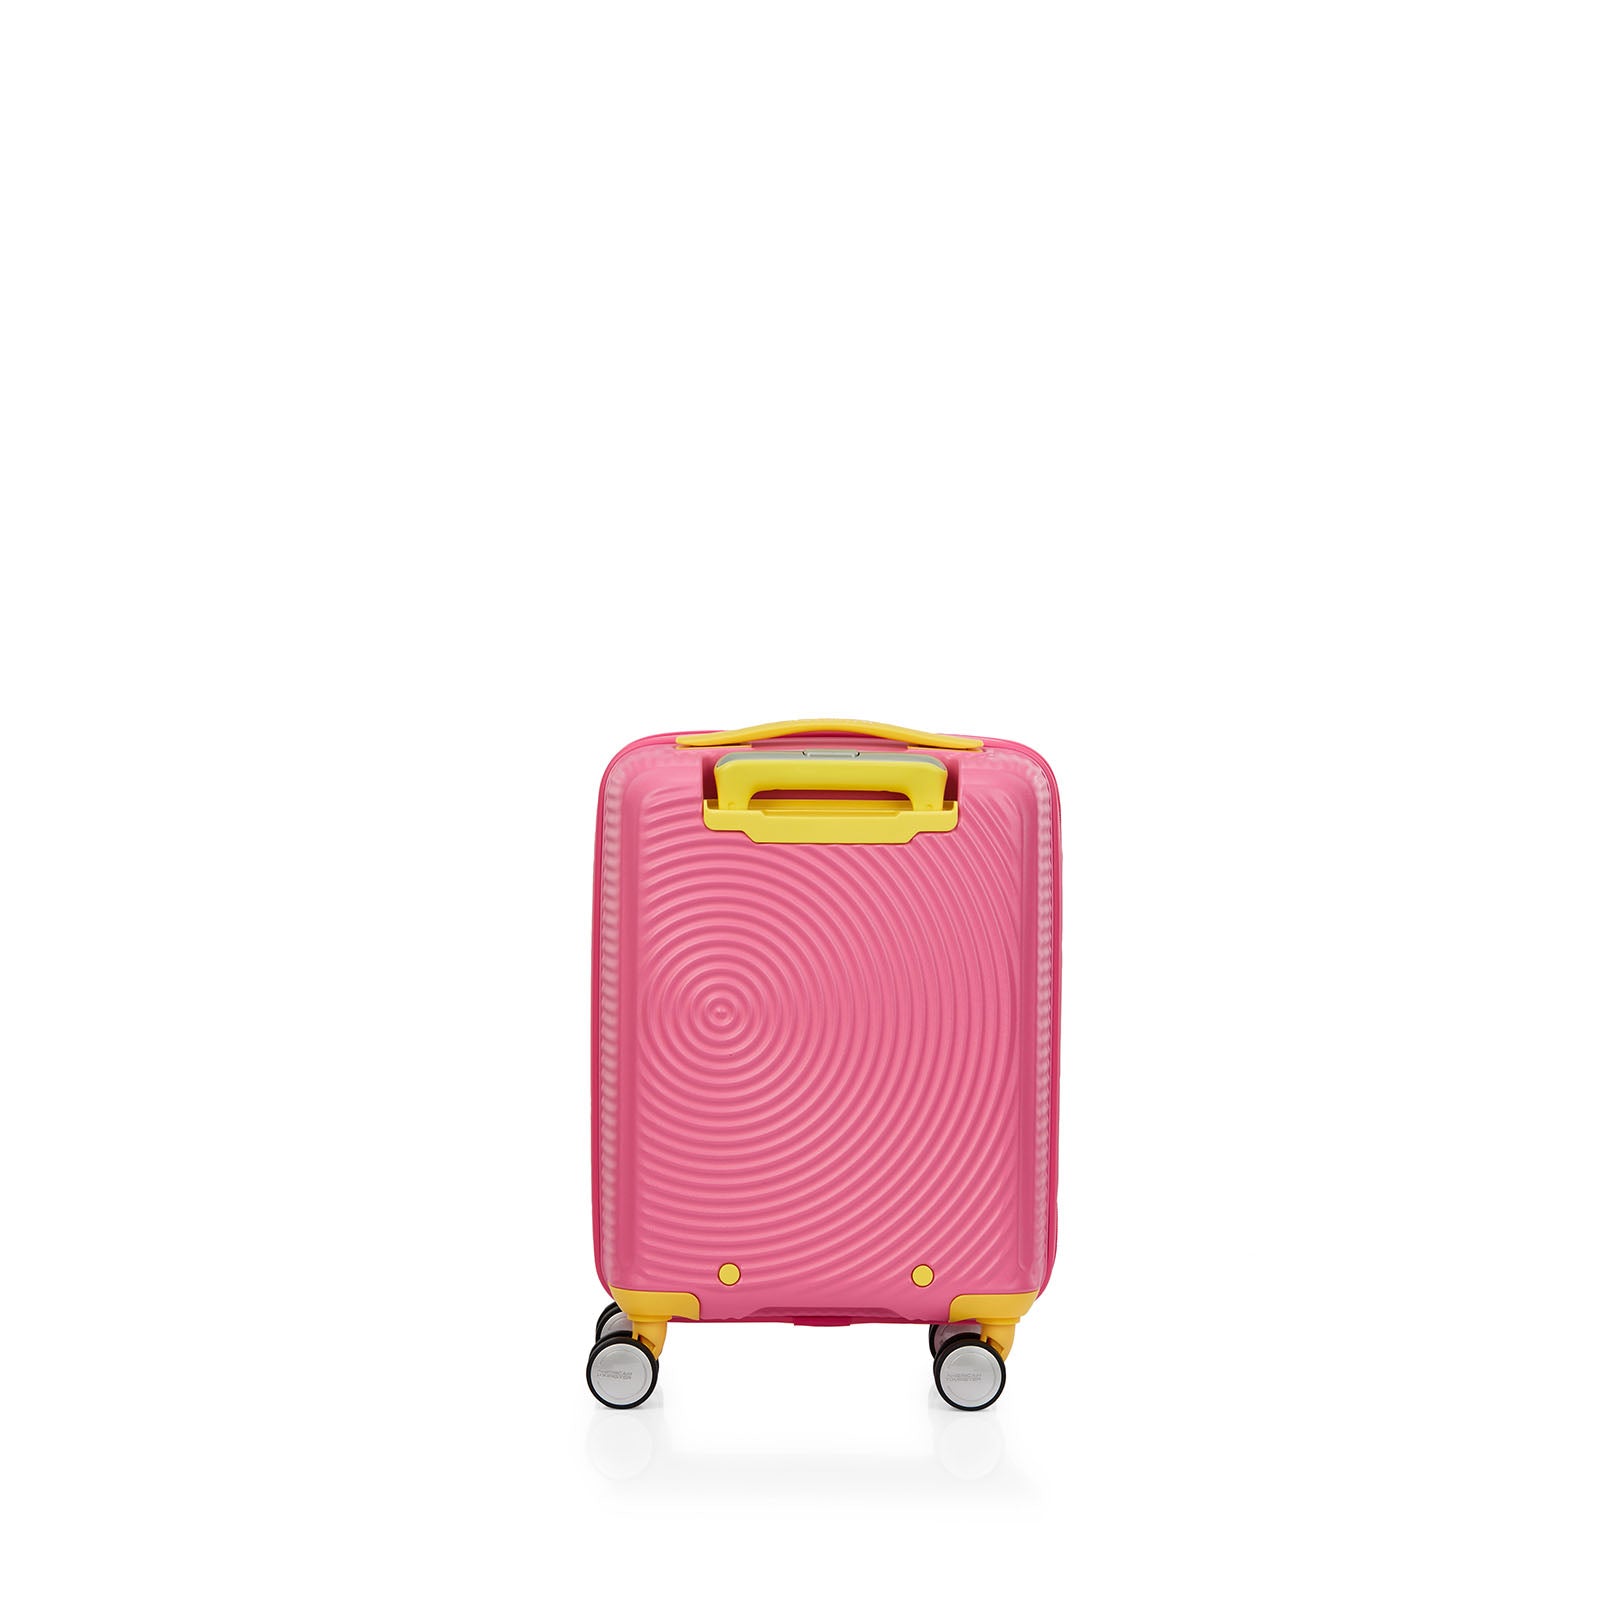 American-Tourister-Little-Curio-47cm-Carry-On-Suitcase-Pink-Yellow-Back